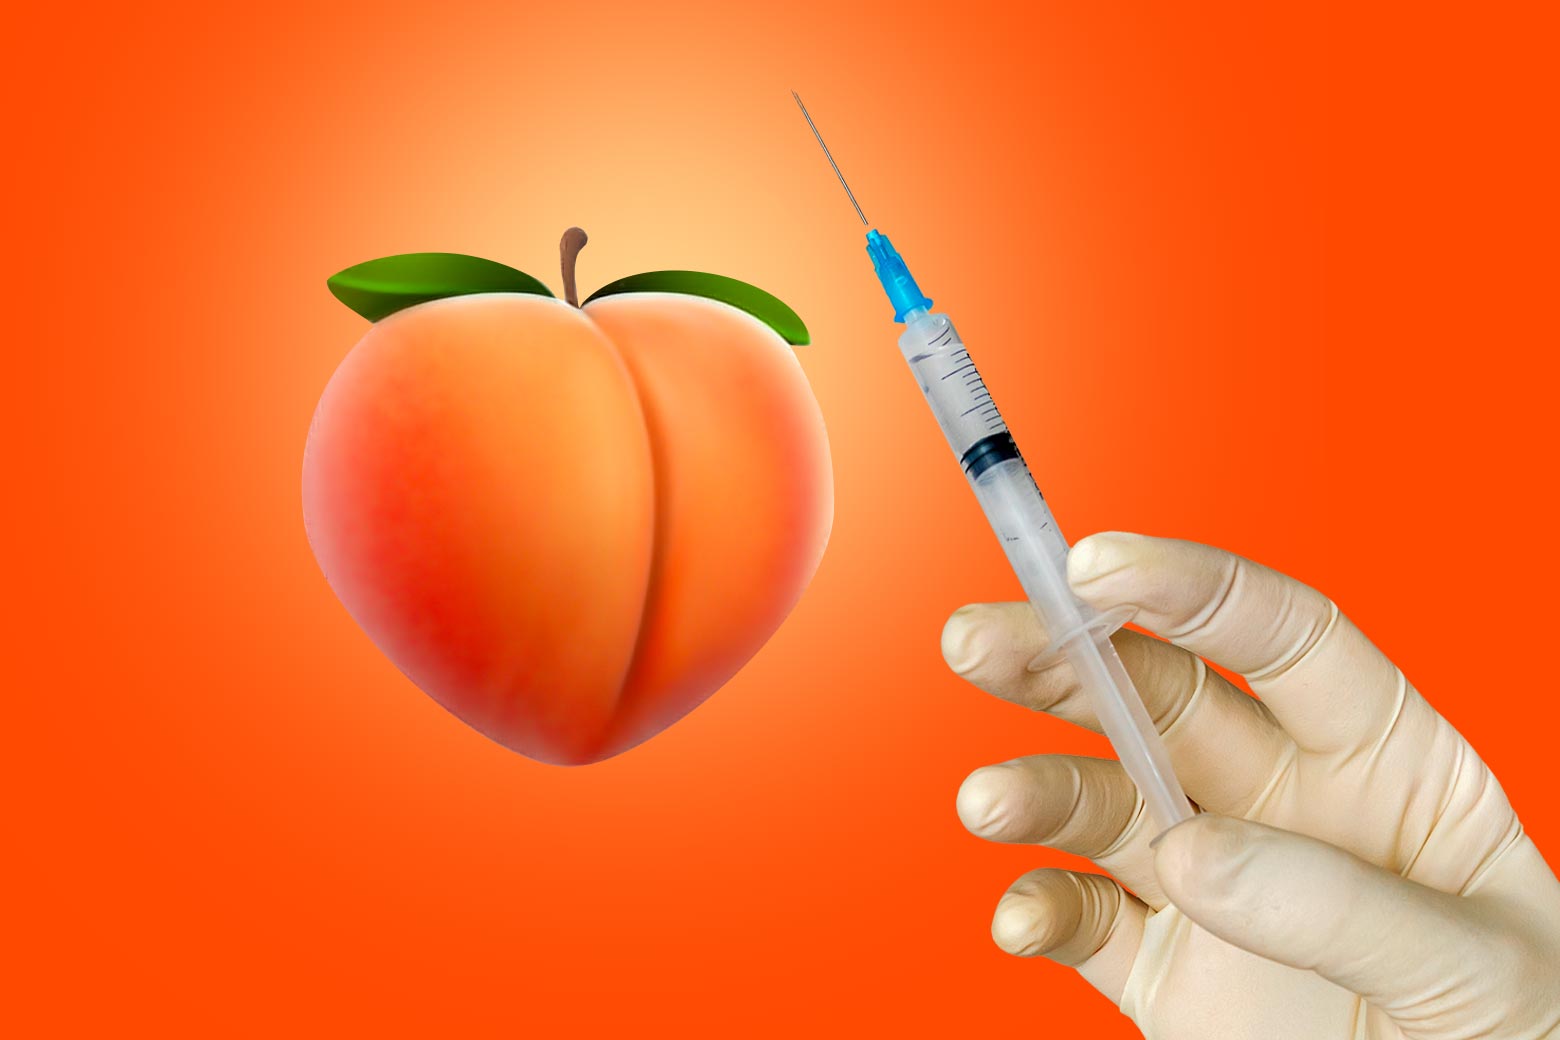 A rubber-gloved hand holds a syringe next to a peach emoji